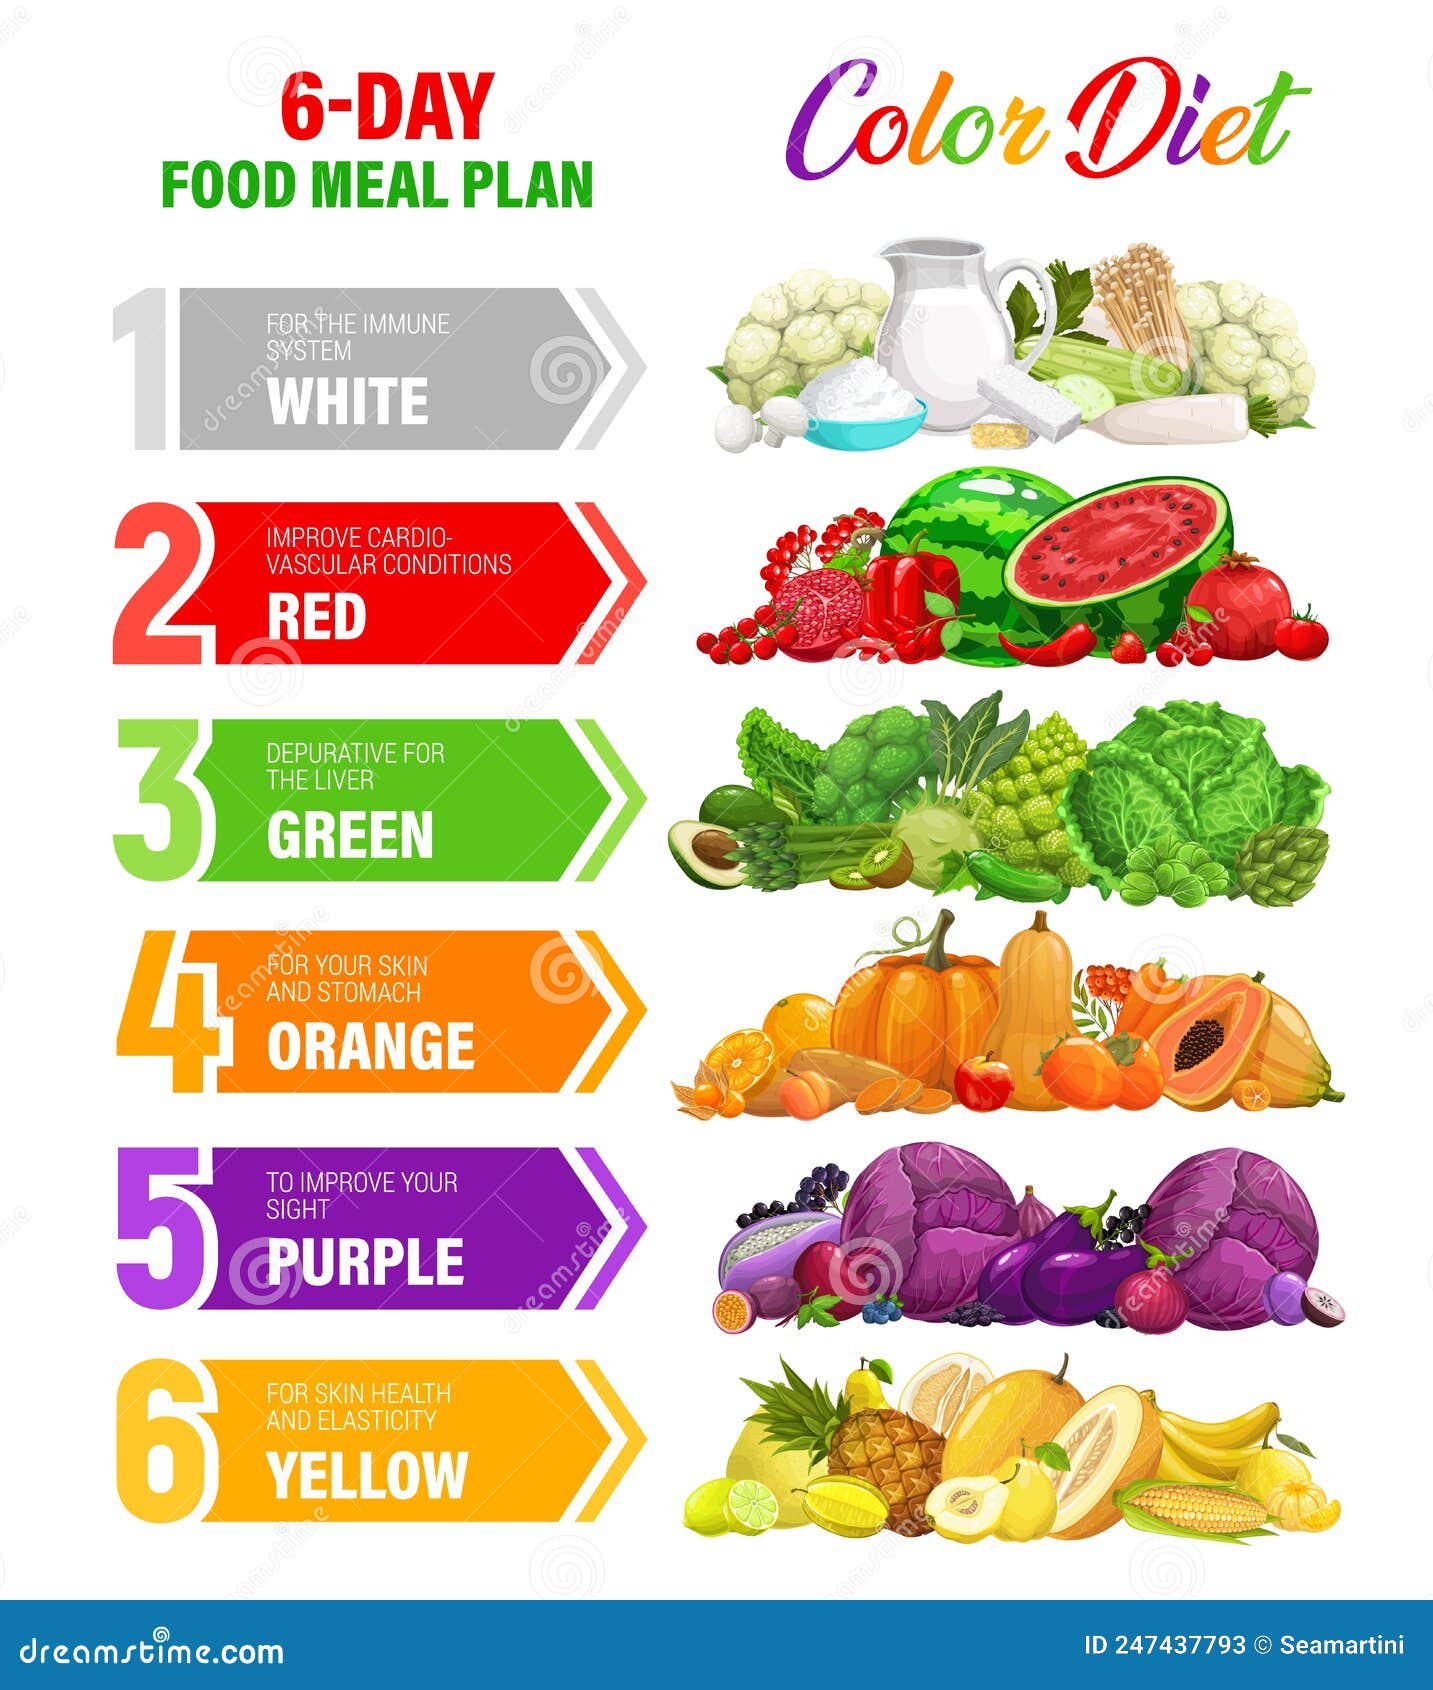 Heart Healthy Kitchen Essentials for Meal Prep Infographic